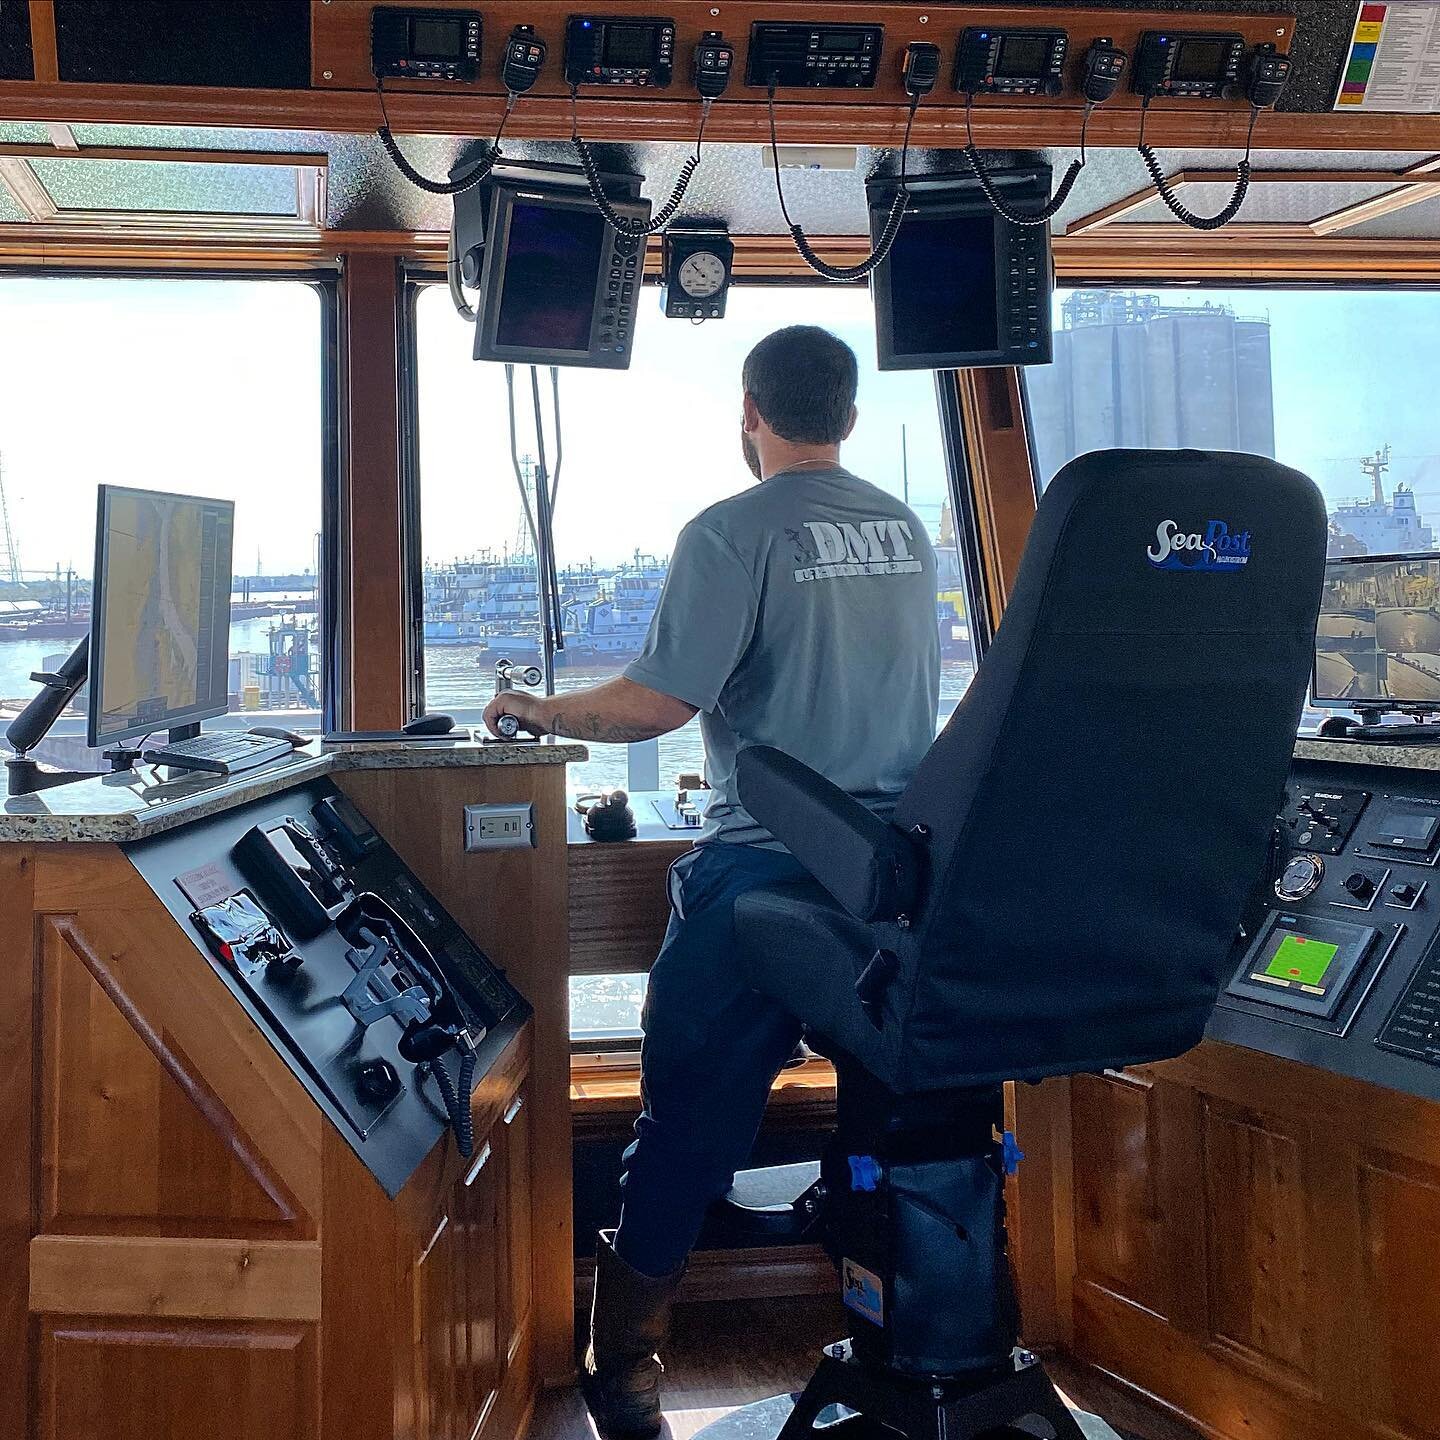 Wheelhouse Wednesday with Seth Helmer steering on the M/V Miss Genevieve getting the job done! Seth has been hard at work, soon will be getting a firm position in that captain&rsquo;s chair!
🤩⛴⚓️🌟
Thank you Captain Zane @zanenaq0918 🌟
.
.
.
#capta